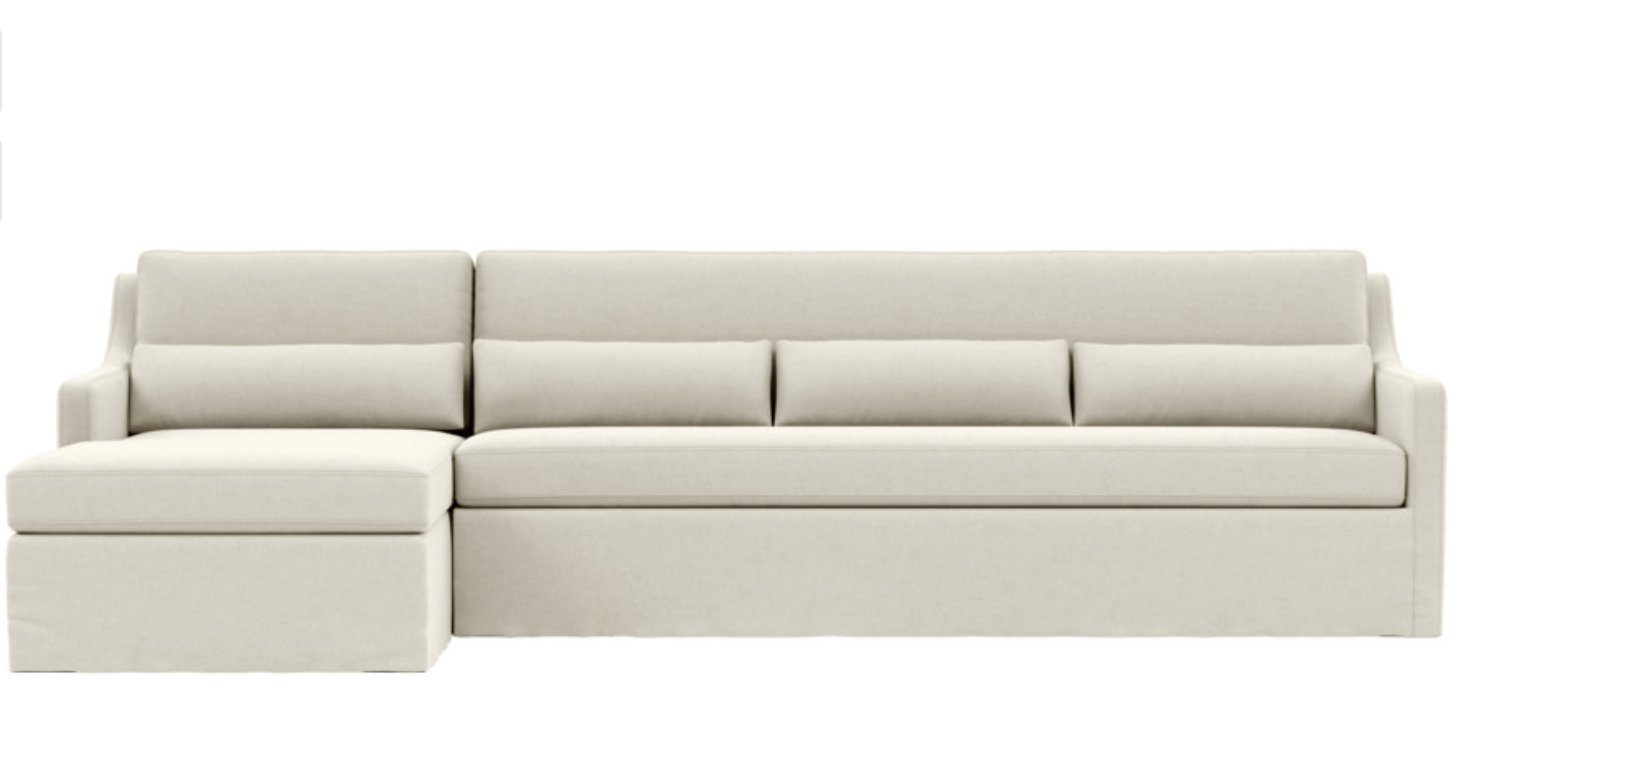 ELLA SLIPCOVERED Slipcovered 4-Seat Left Chaise Sectional - Image 0